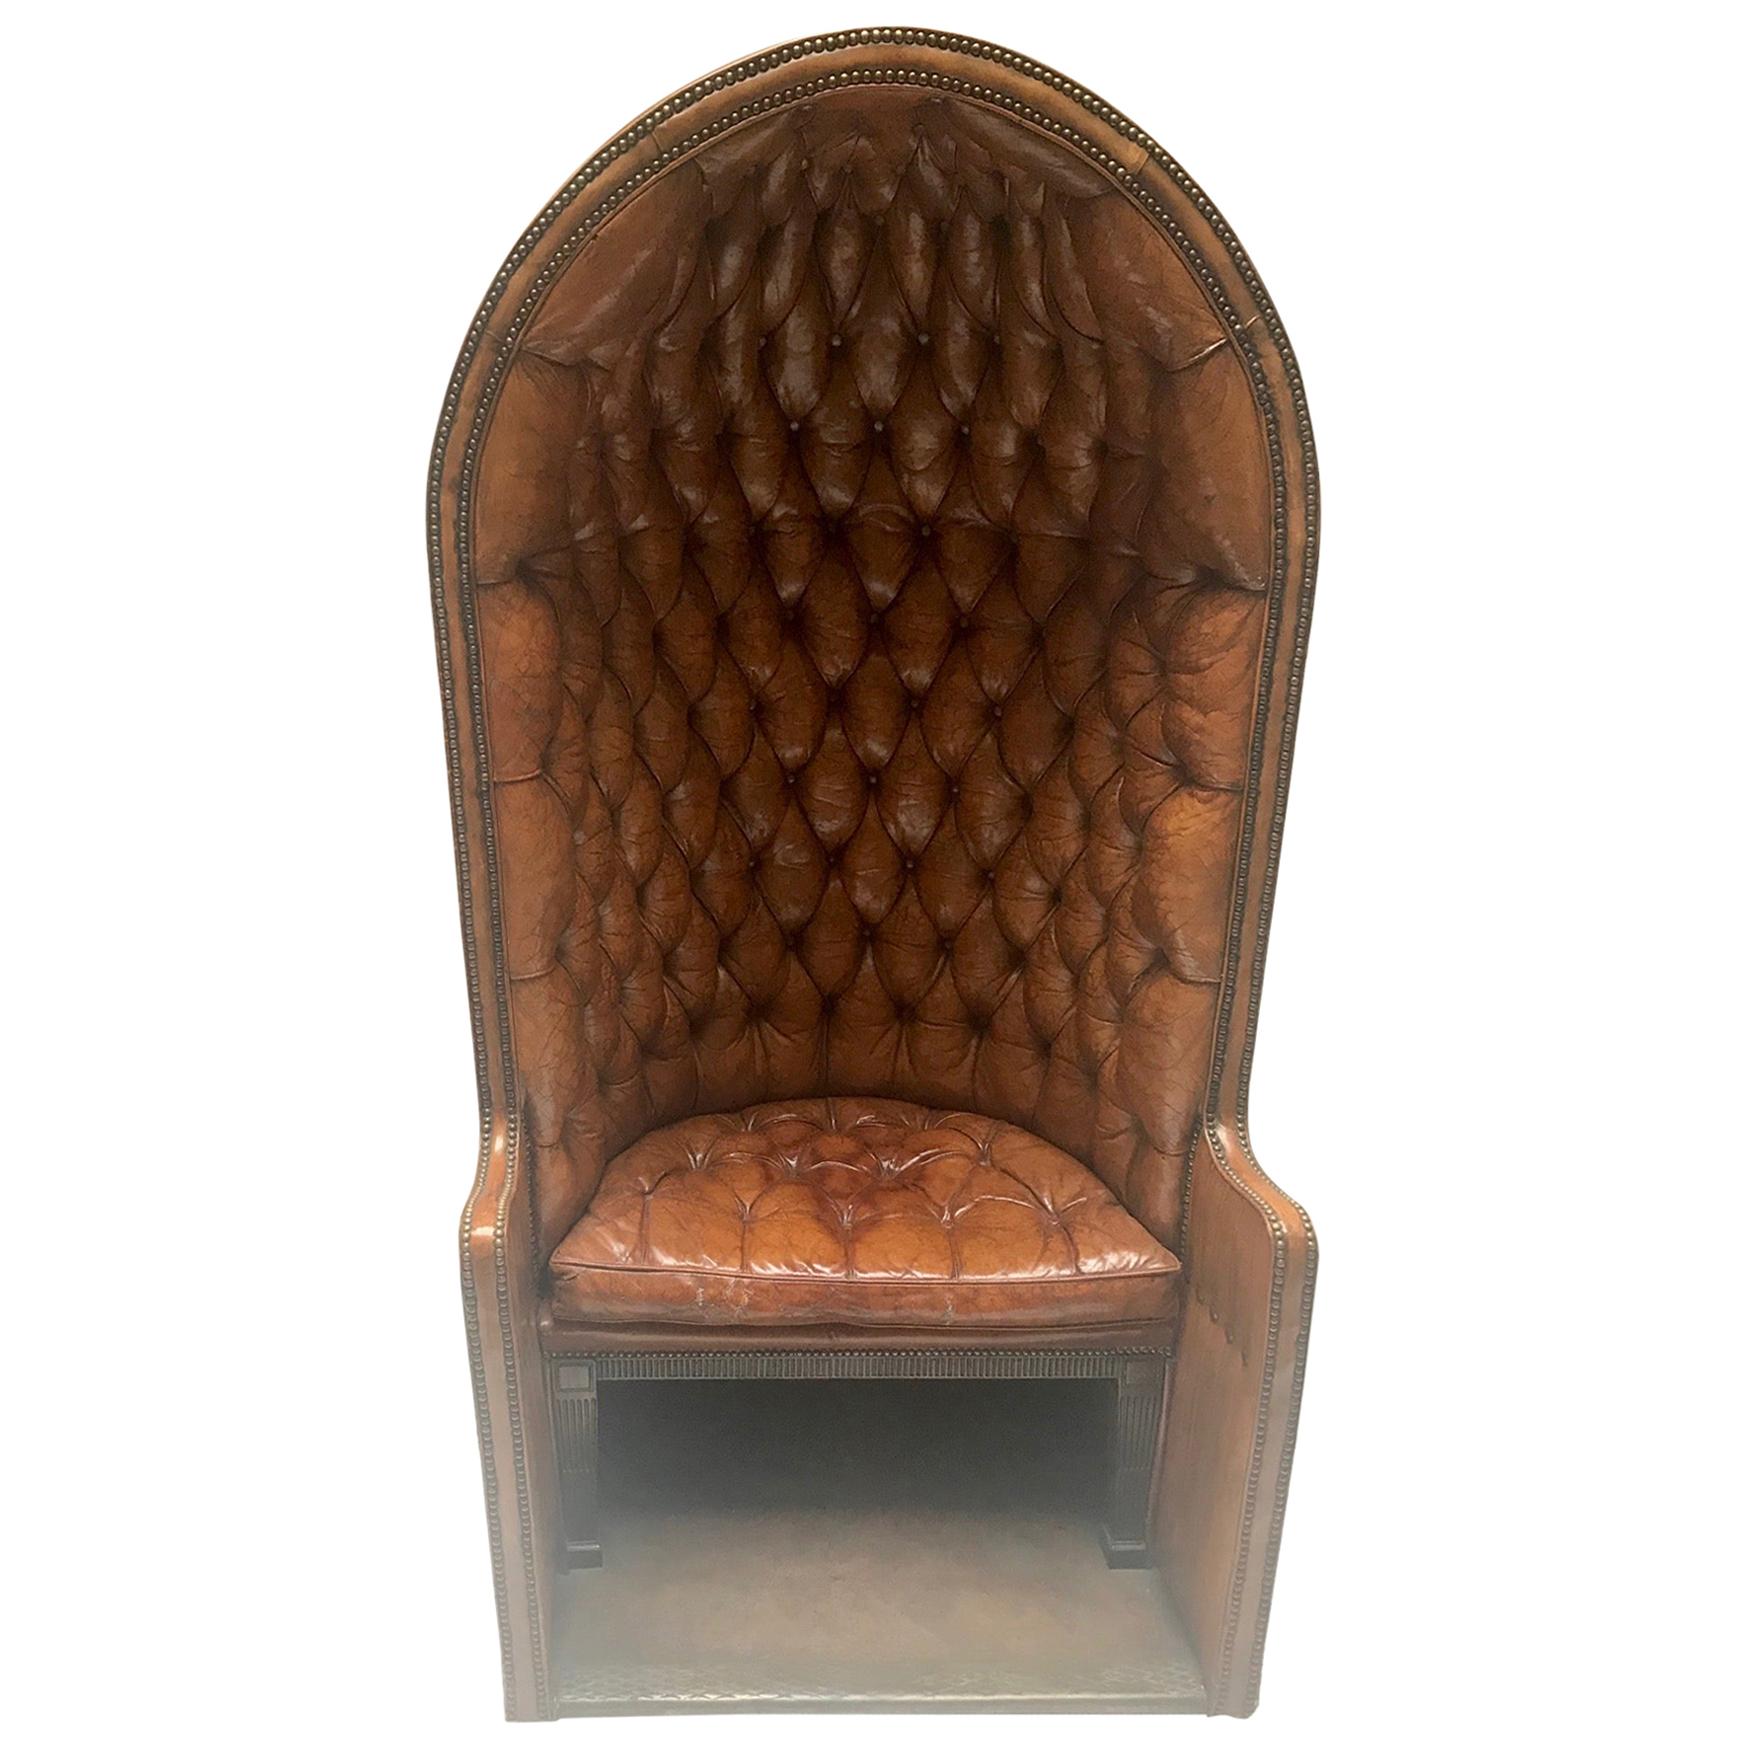 Porter's Chair Having Belonged to Claude François For Sale